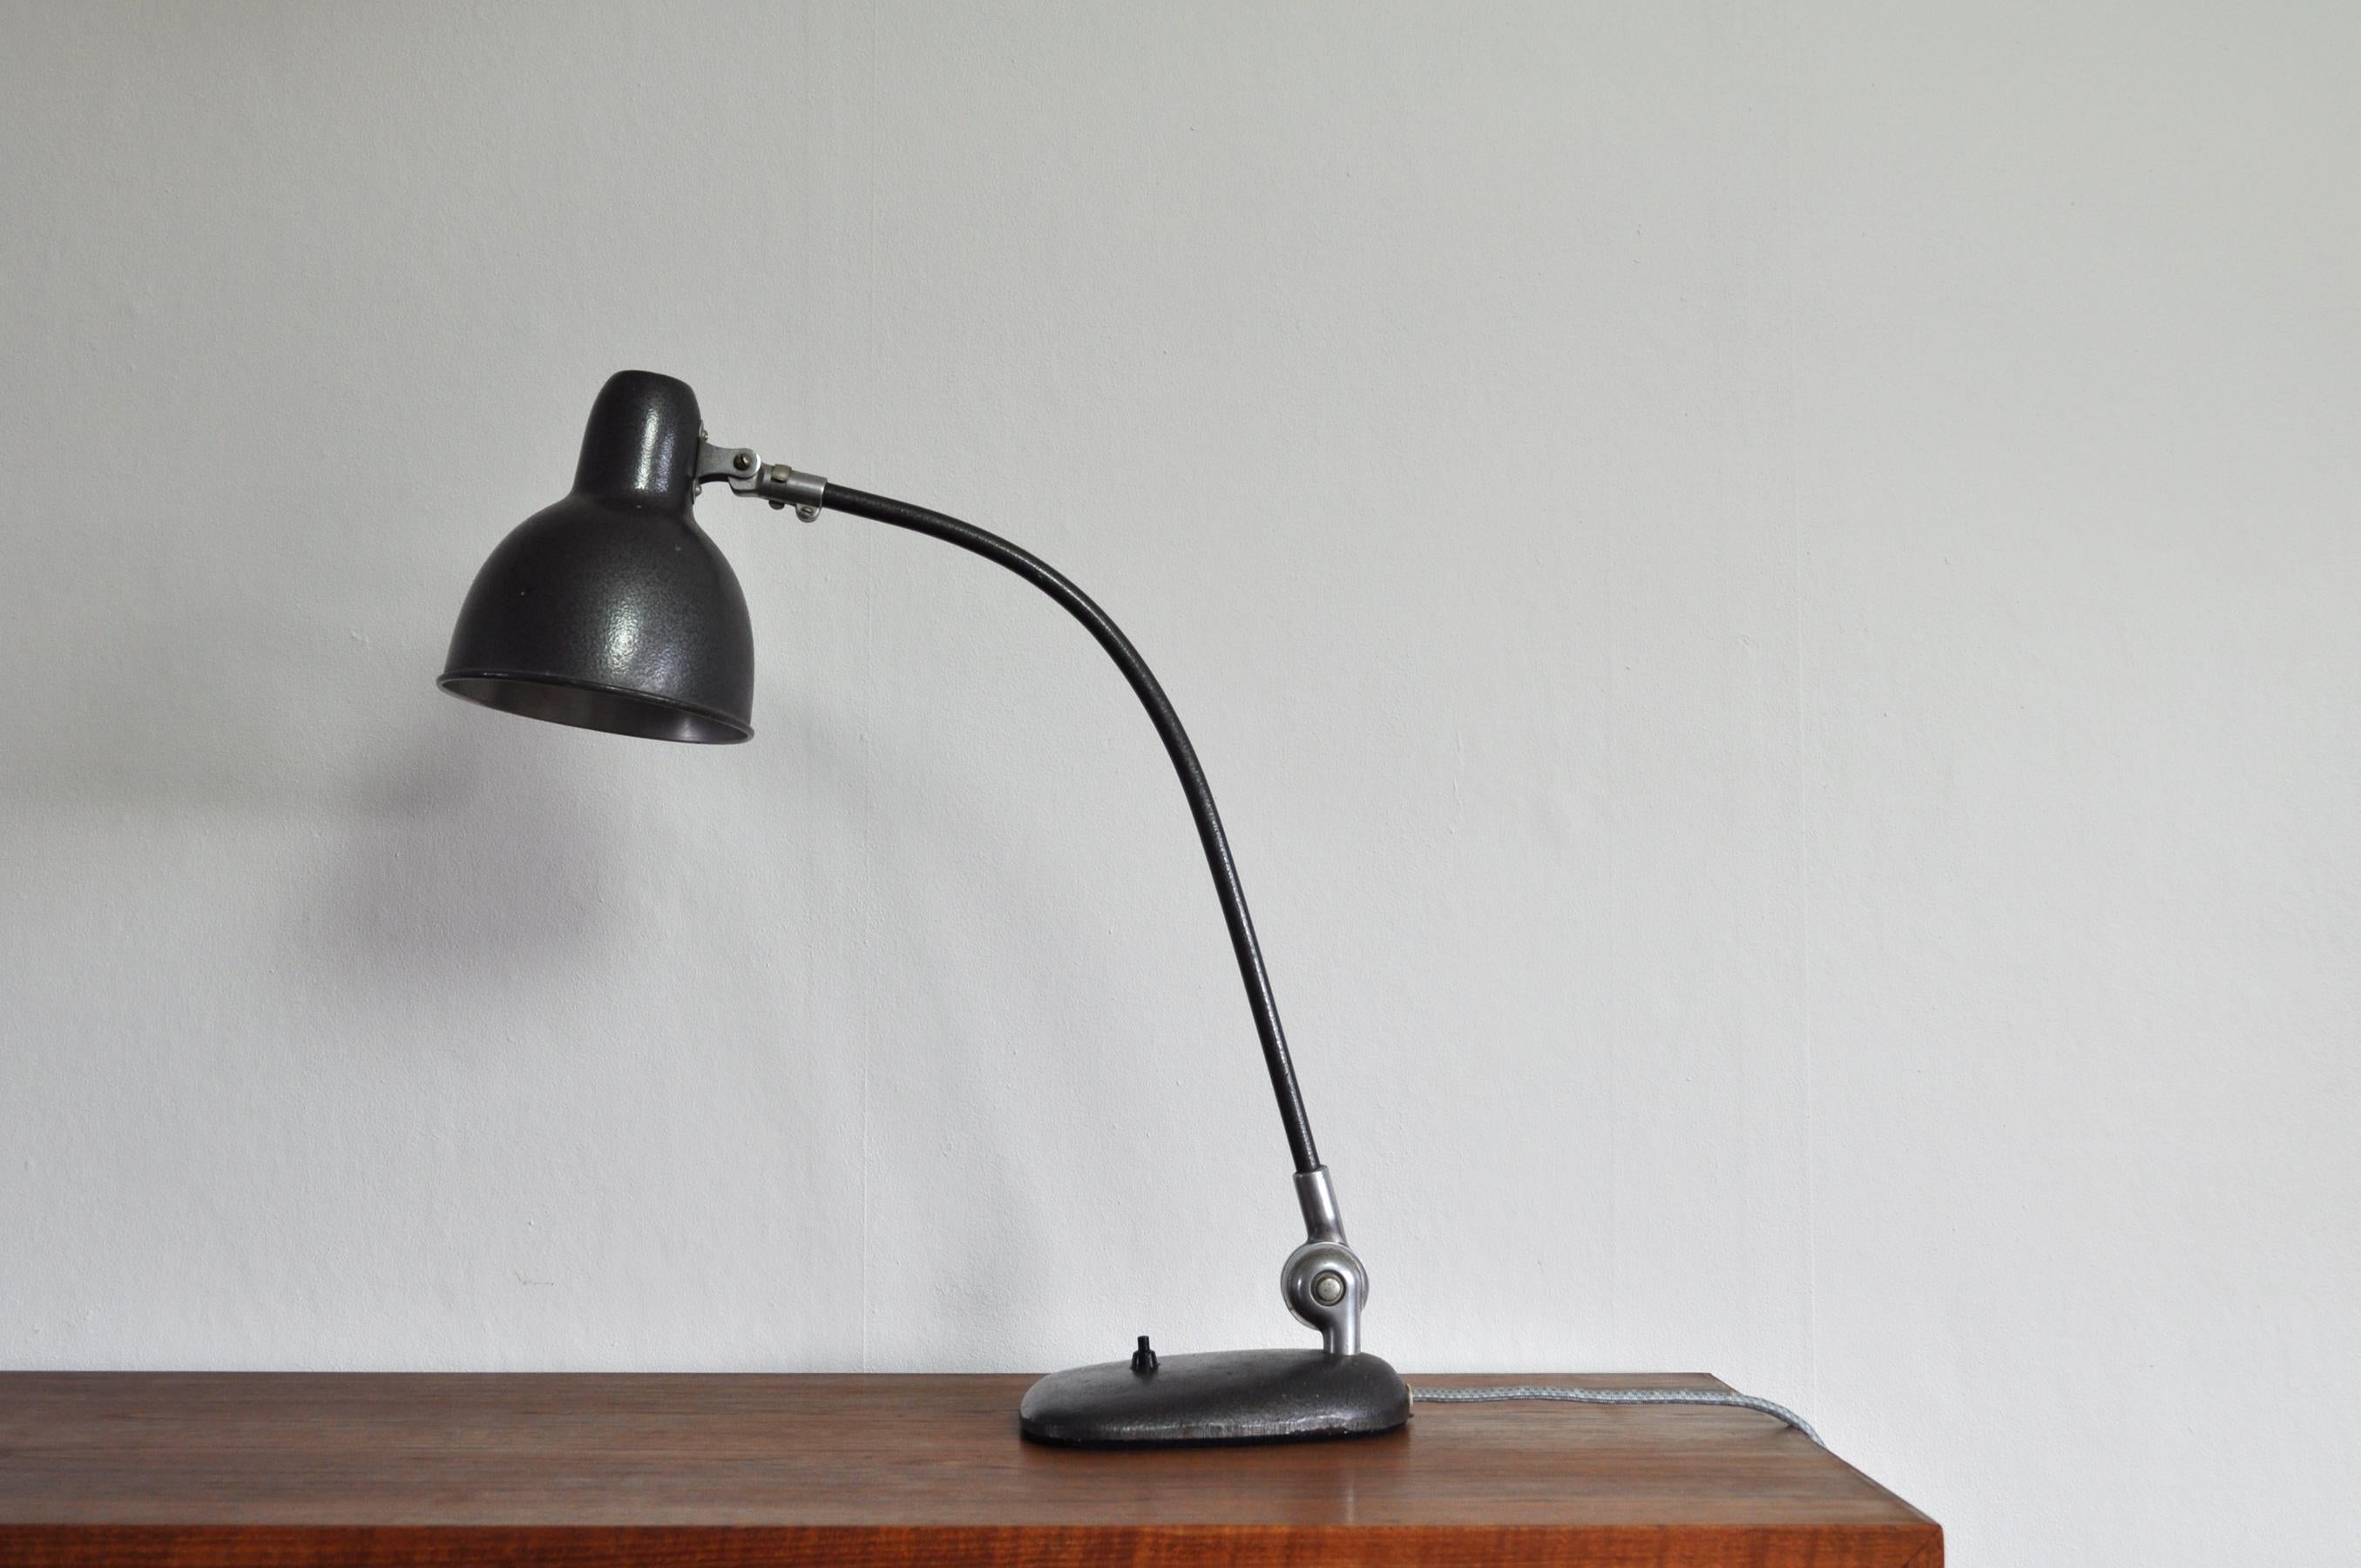 Fully adjustable Bauhaus style desk lamp in metallic dark grey color. Raw industrial look with patination, weight 3.6 kg/ 7.14 lbs. Manufactured in Denmark by ASAS.